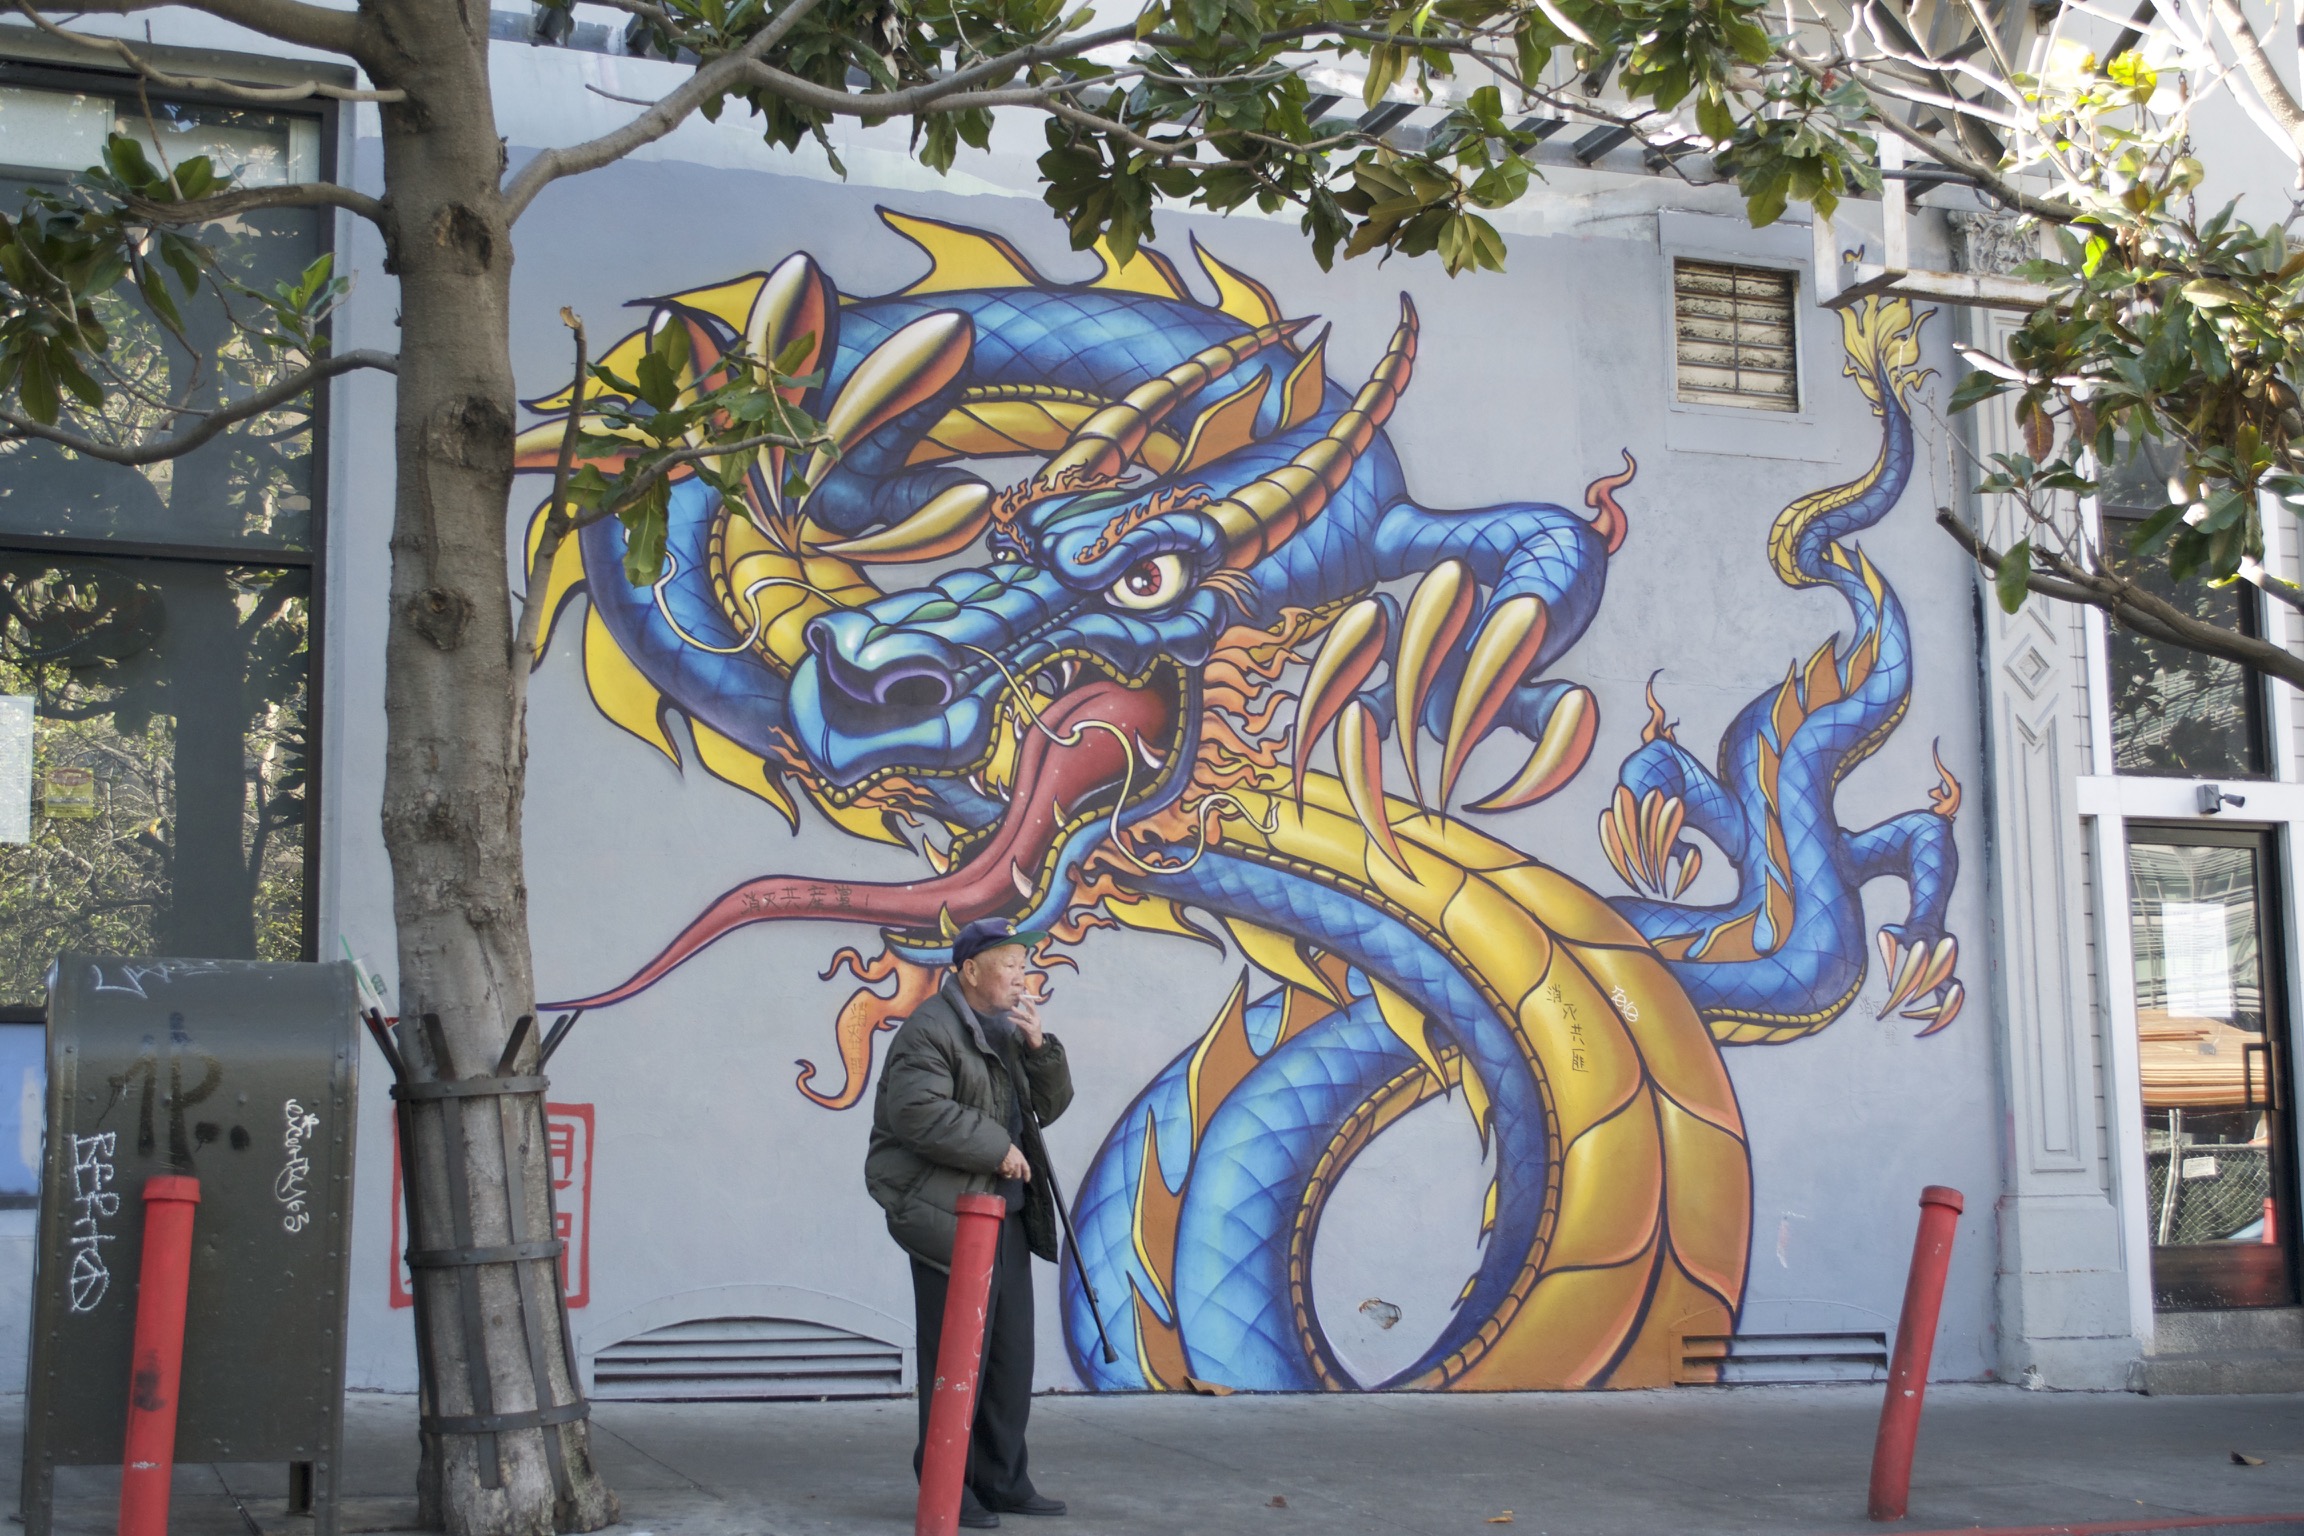 An old smoking man sands in front of a mural of a blue dragon.